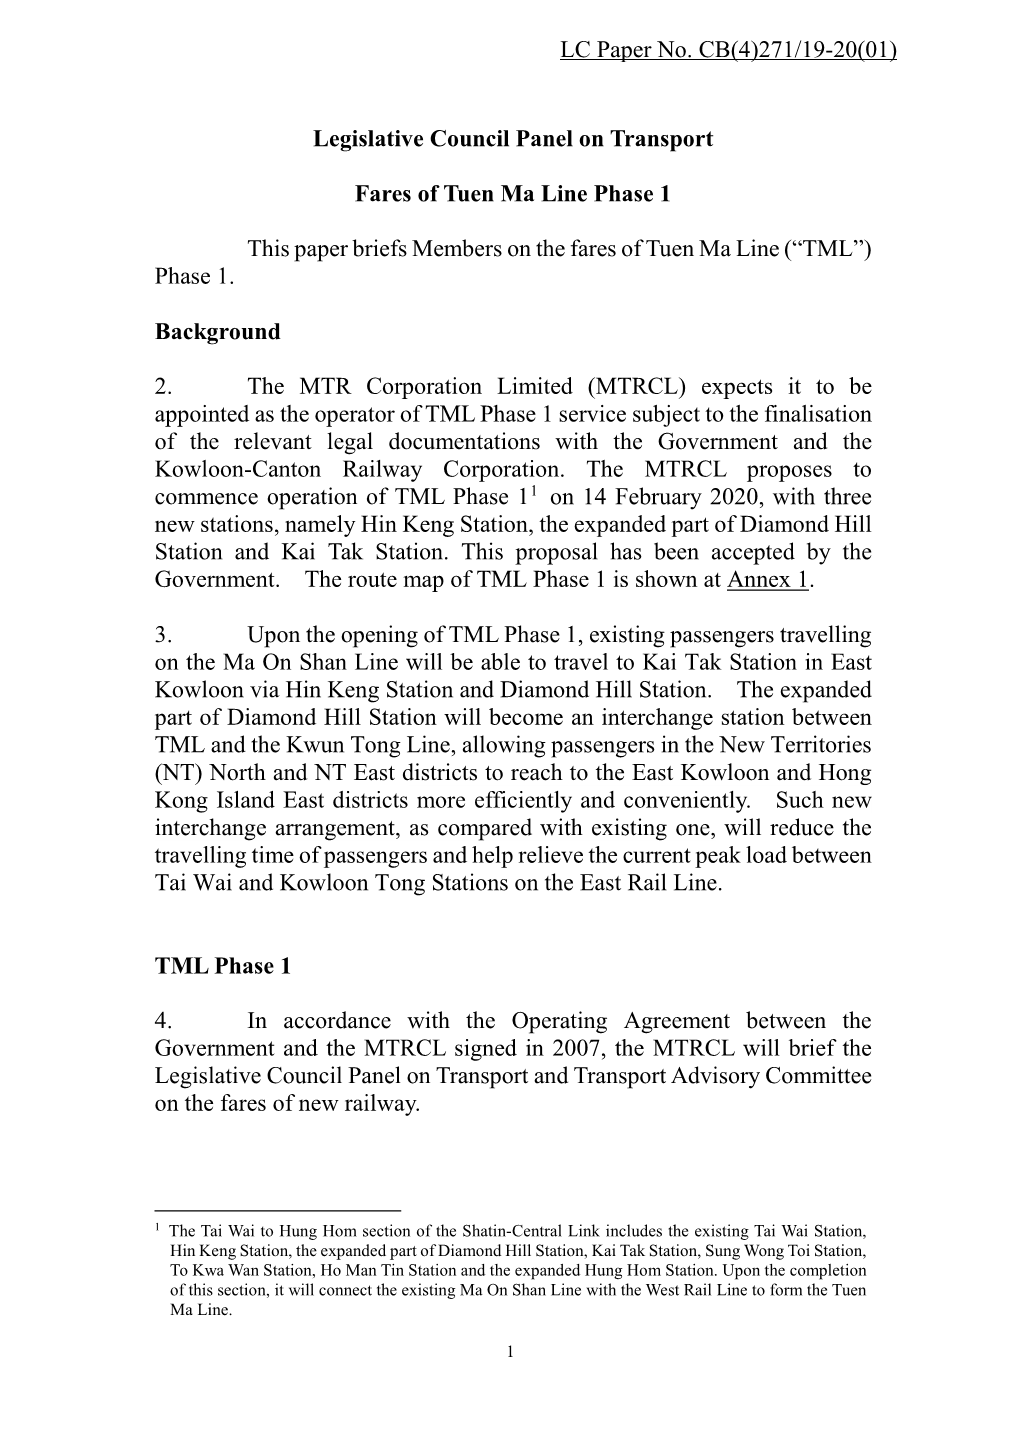 Paper on Fares of Tuen Ma Line Phase 1 Provided by MTR Corporation